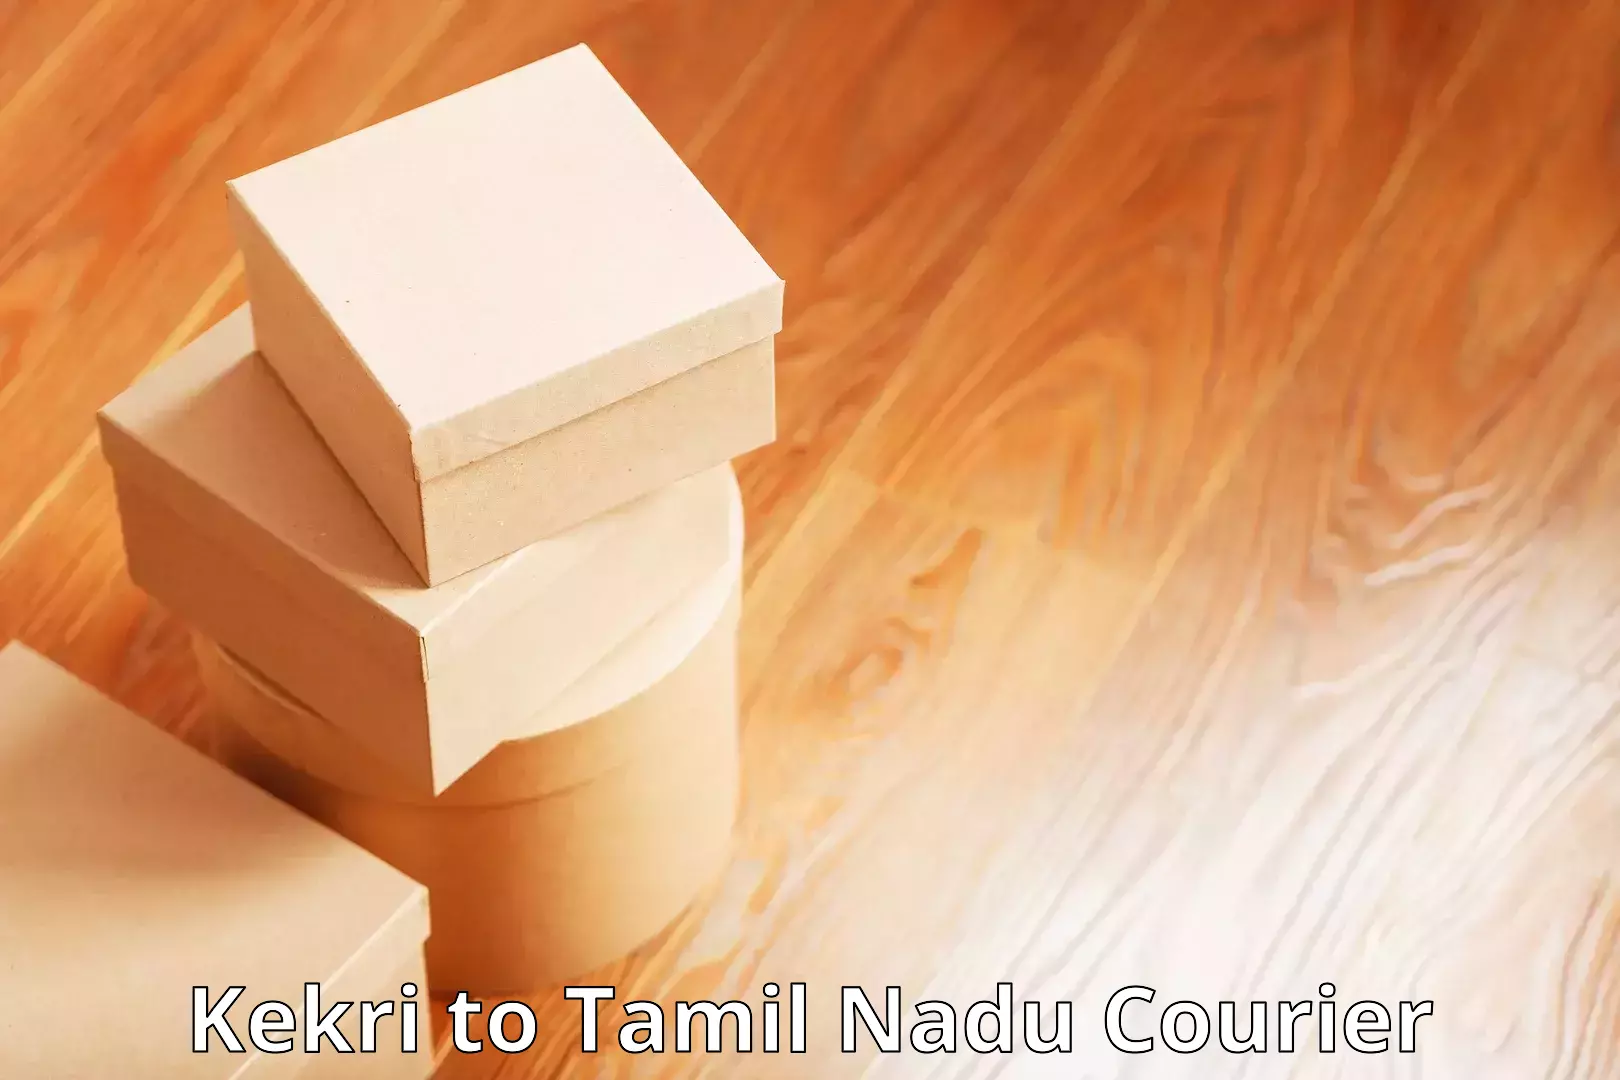 State-of-the-art courier technology Kekri to Papanasam